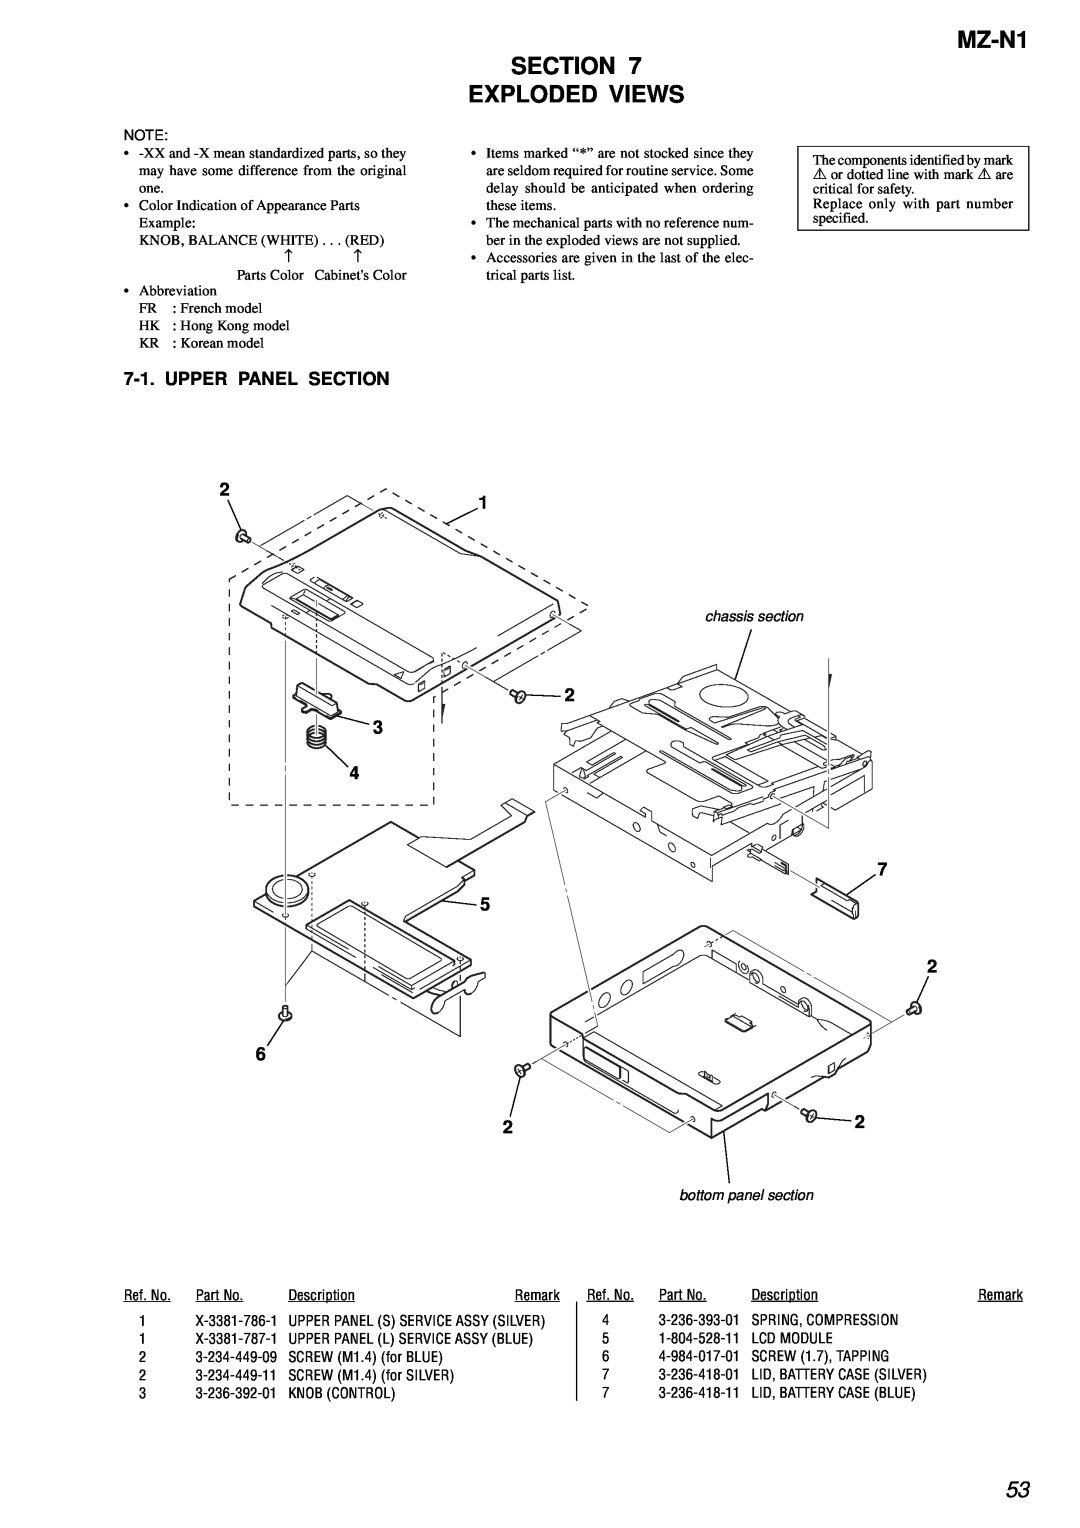 Sony service manual MZ-N1 SECTION EXPLODED VIEWS, Upper Panel Section, 2 3, bottom panel section 